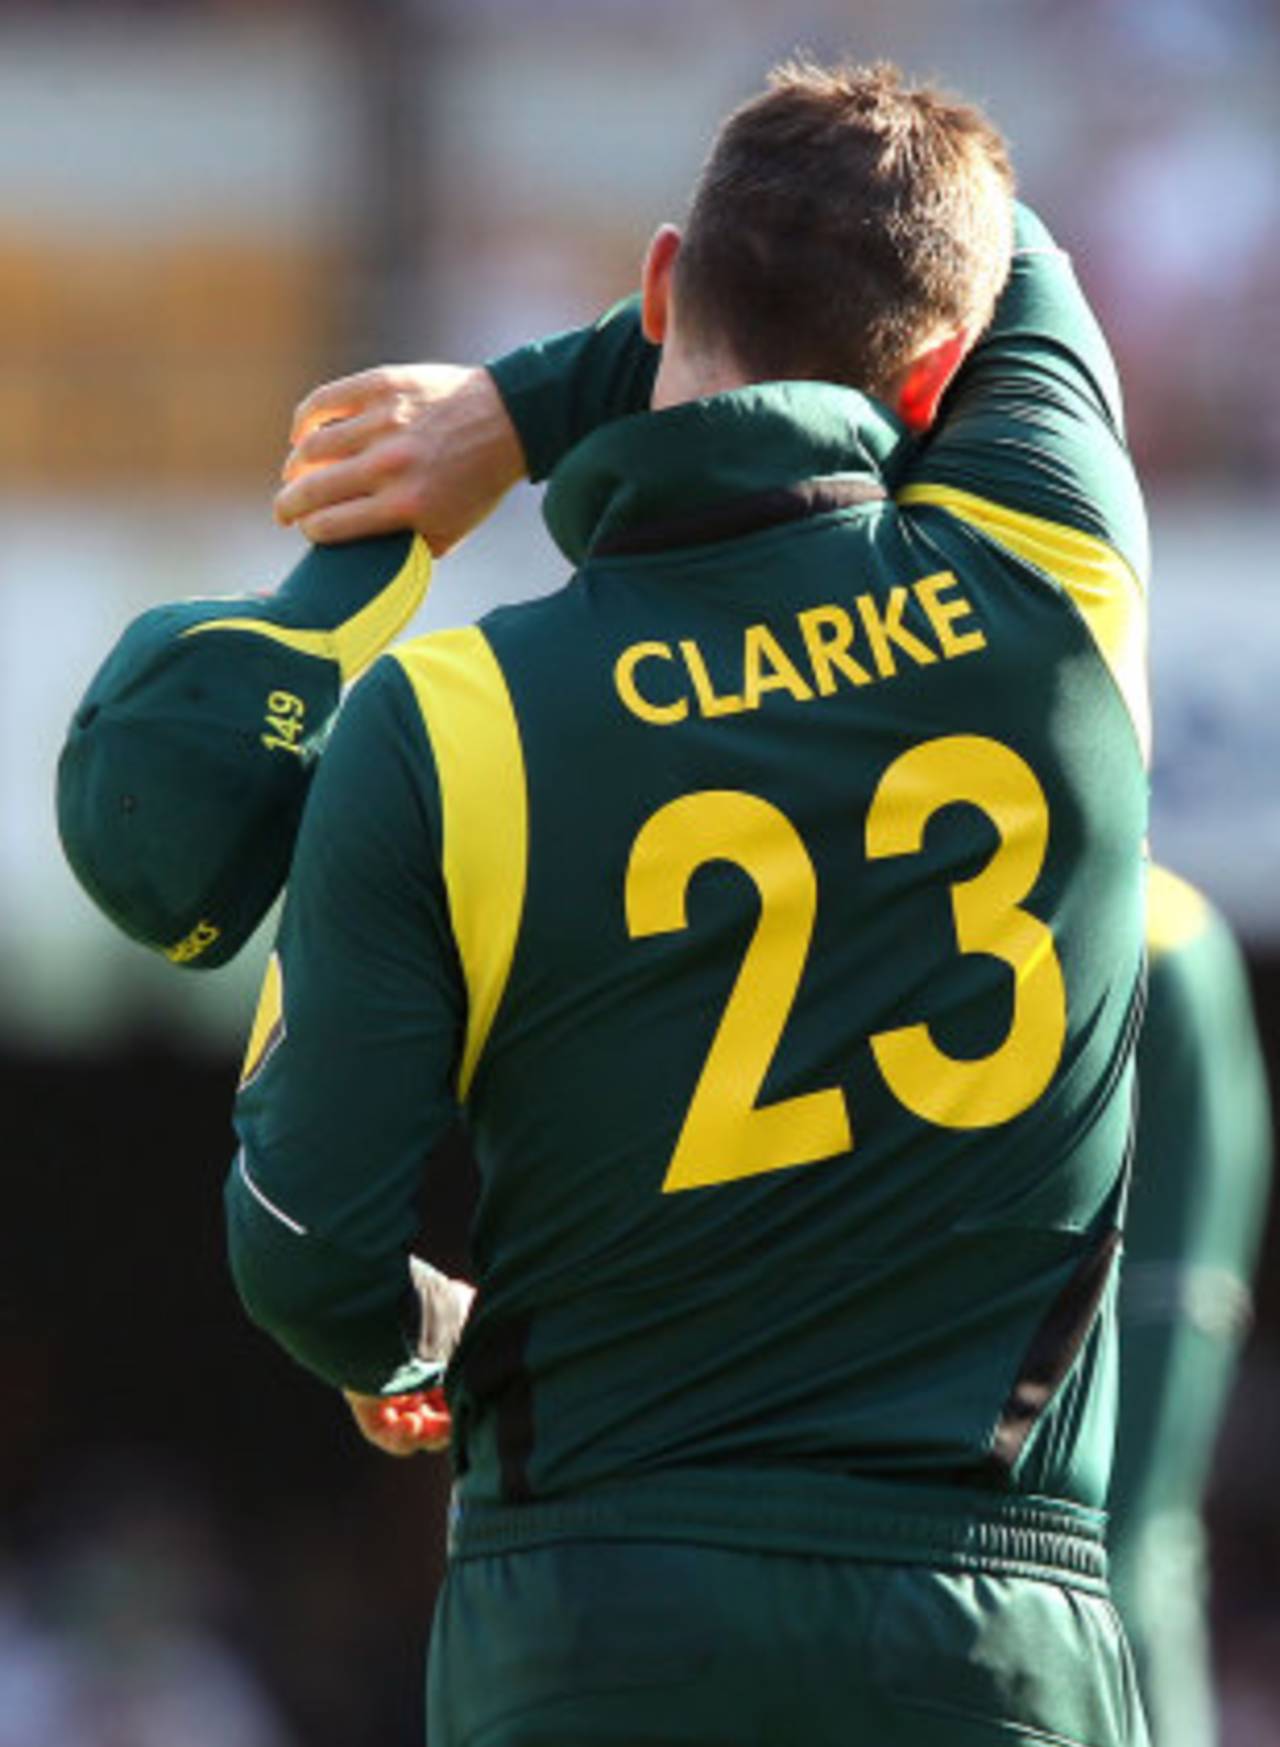 Michael Clarke returned from his break to take part in a heavy defeat - but his priorities for 2013 lie elsewhere&nbsp;&nbsp;&bull;&nbsp;&nbsp;Associated Press